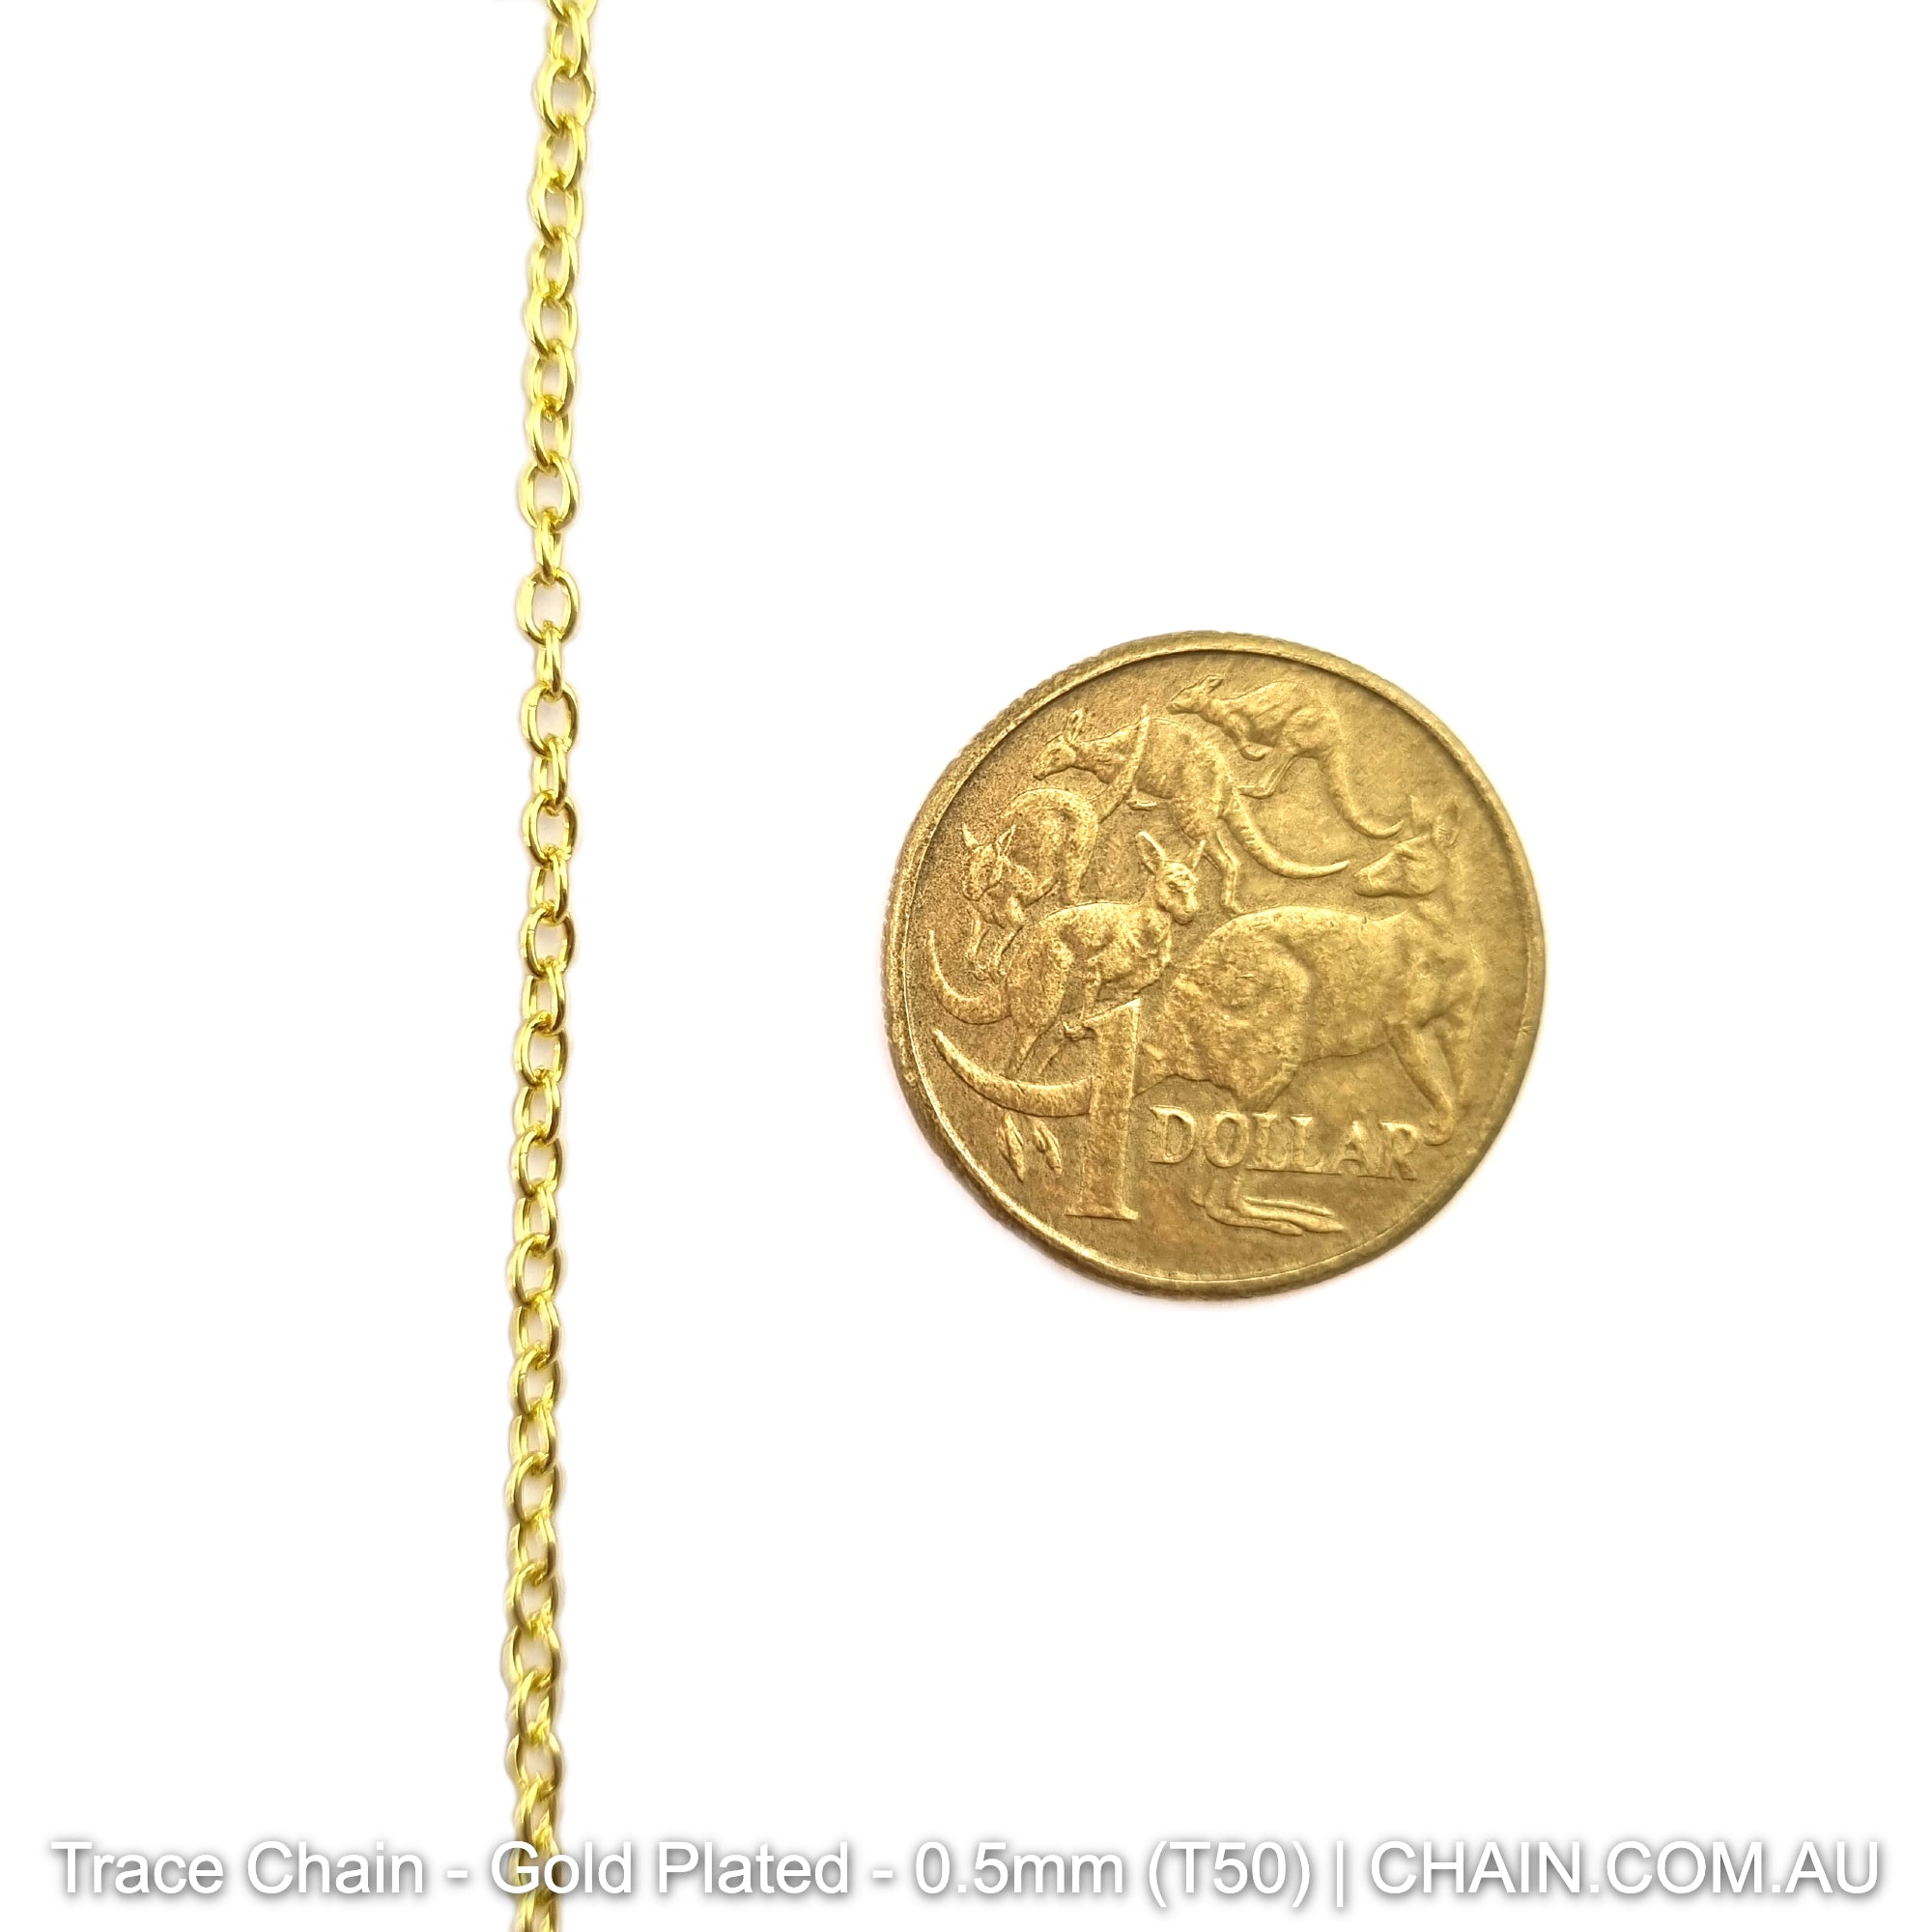 Trace Chain in a Gold Plated Finish. Size: 0.5mm, T50. Jewellery Chain, Australia wide shipping. Shop chain.com.au